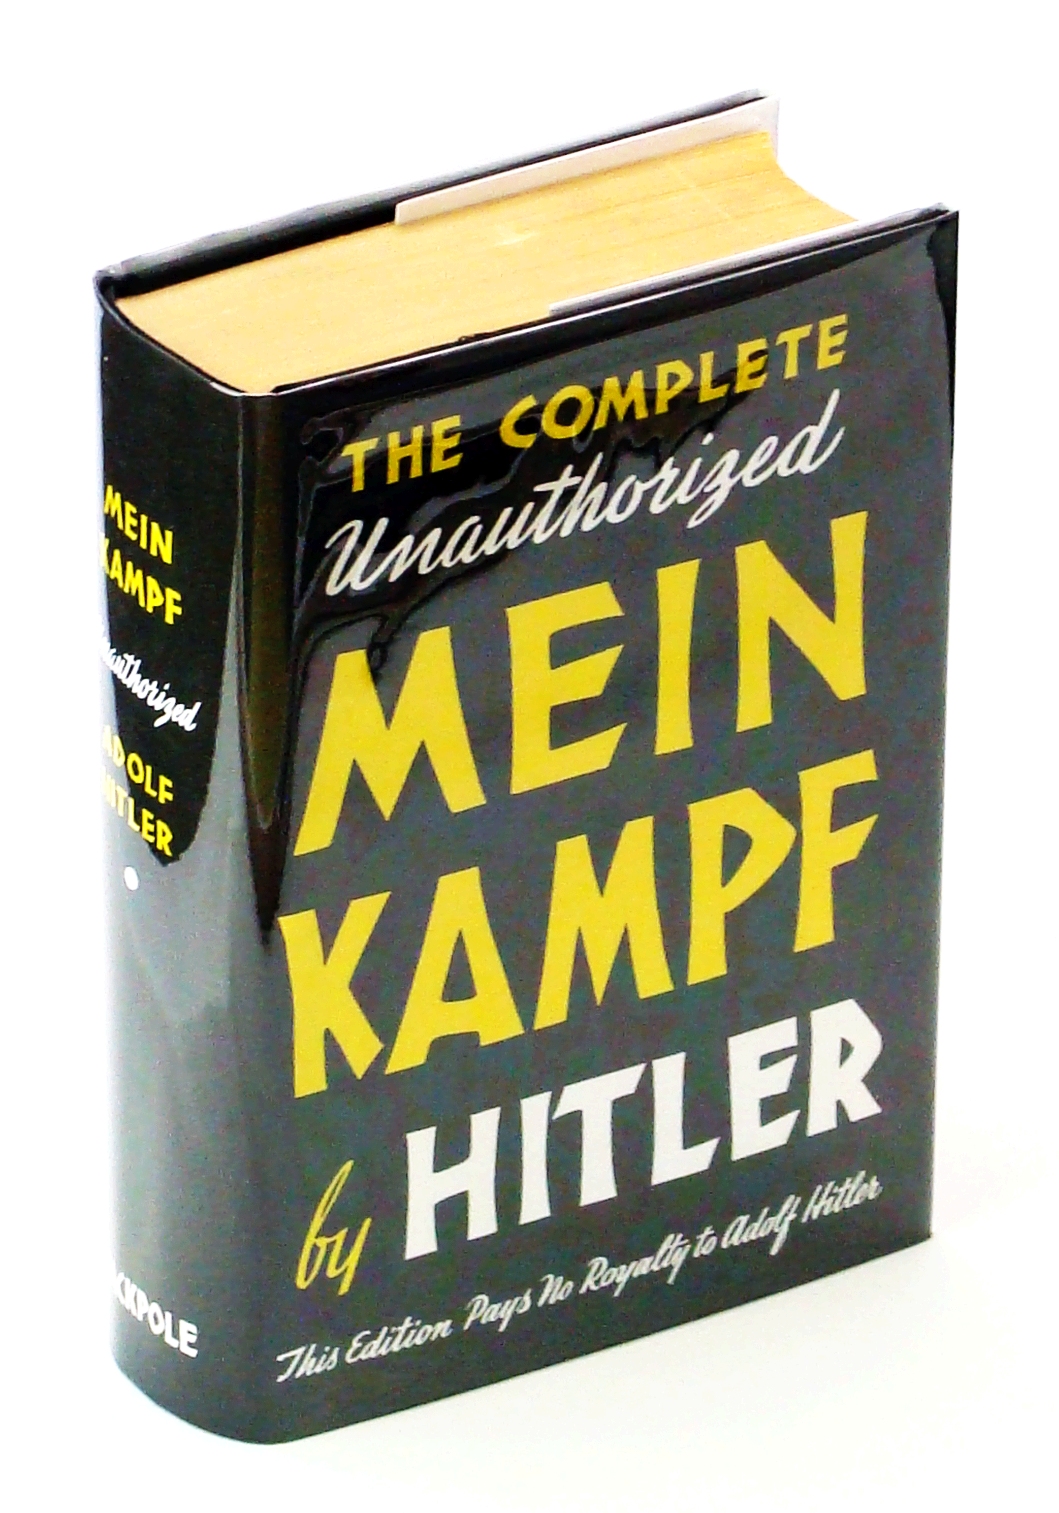 Image for Mein Kampf - The First Complete and Unexpurgated Edition Published in the English Language - Unauthorized: This Edition Pays No Royalties to Adolf Hitler